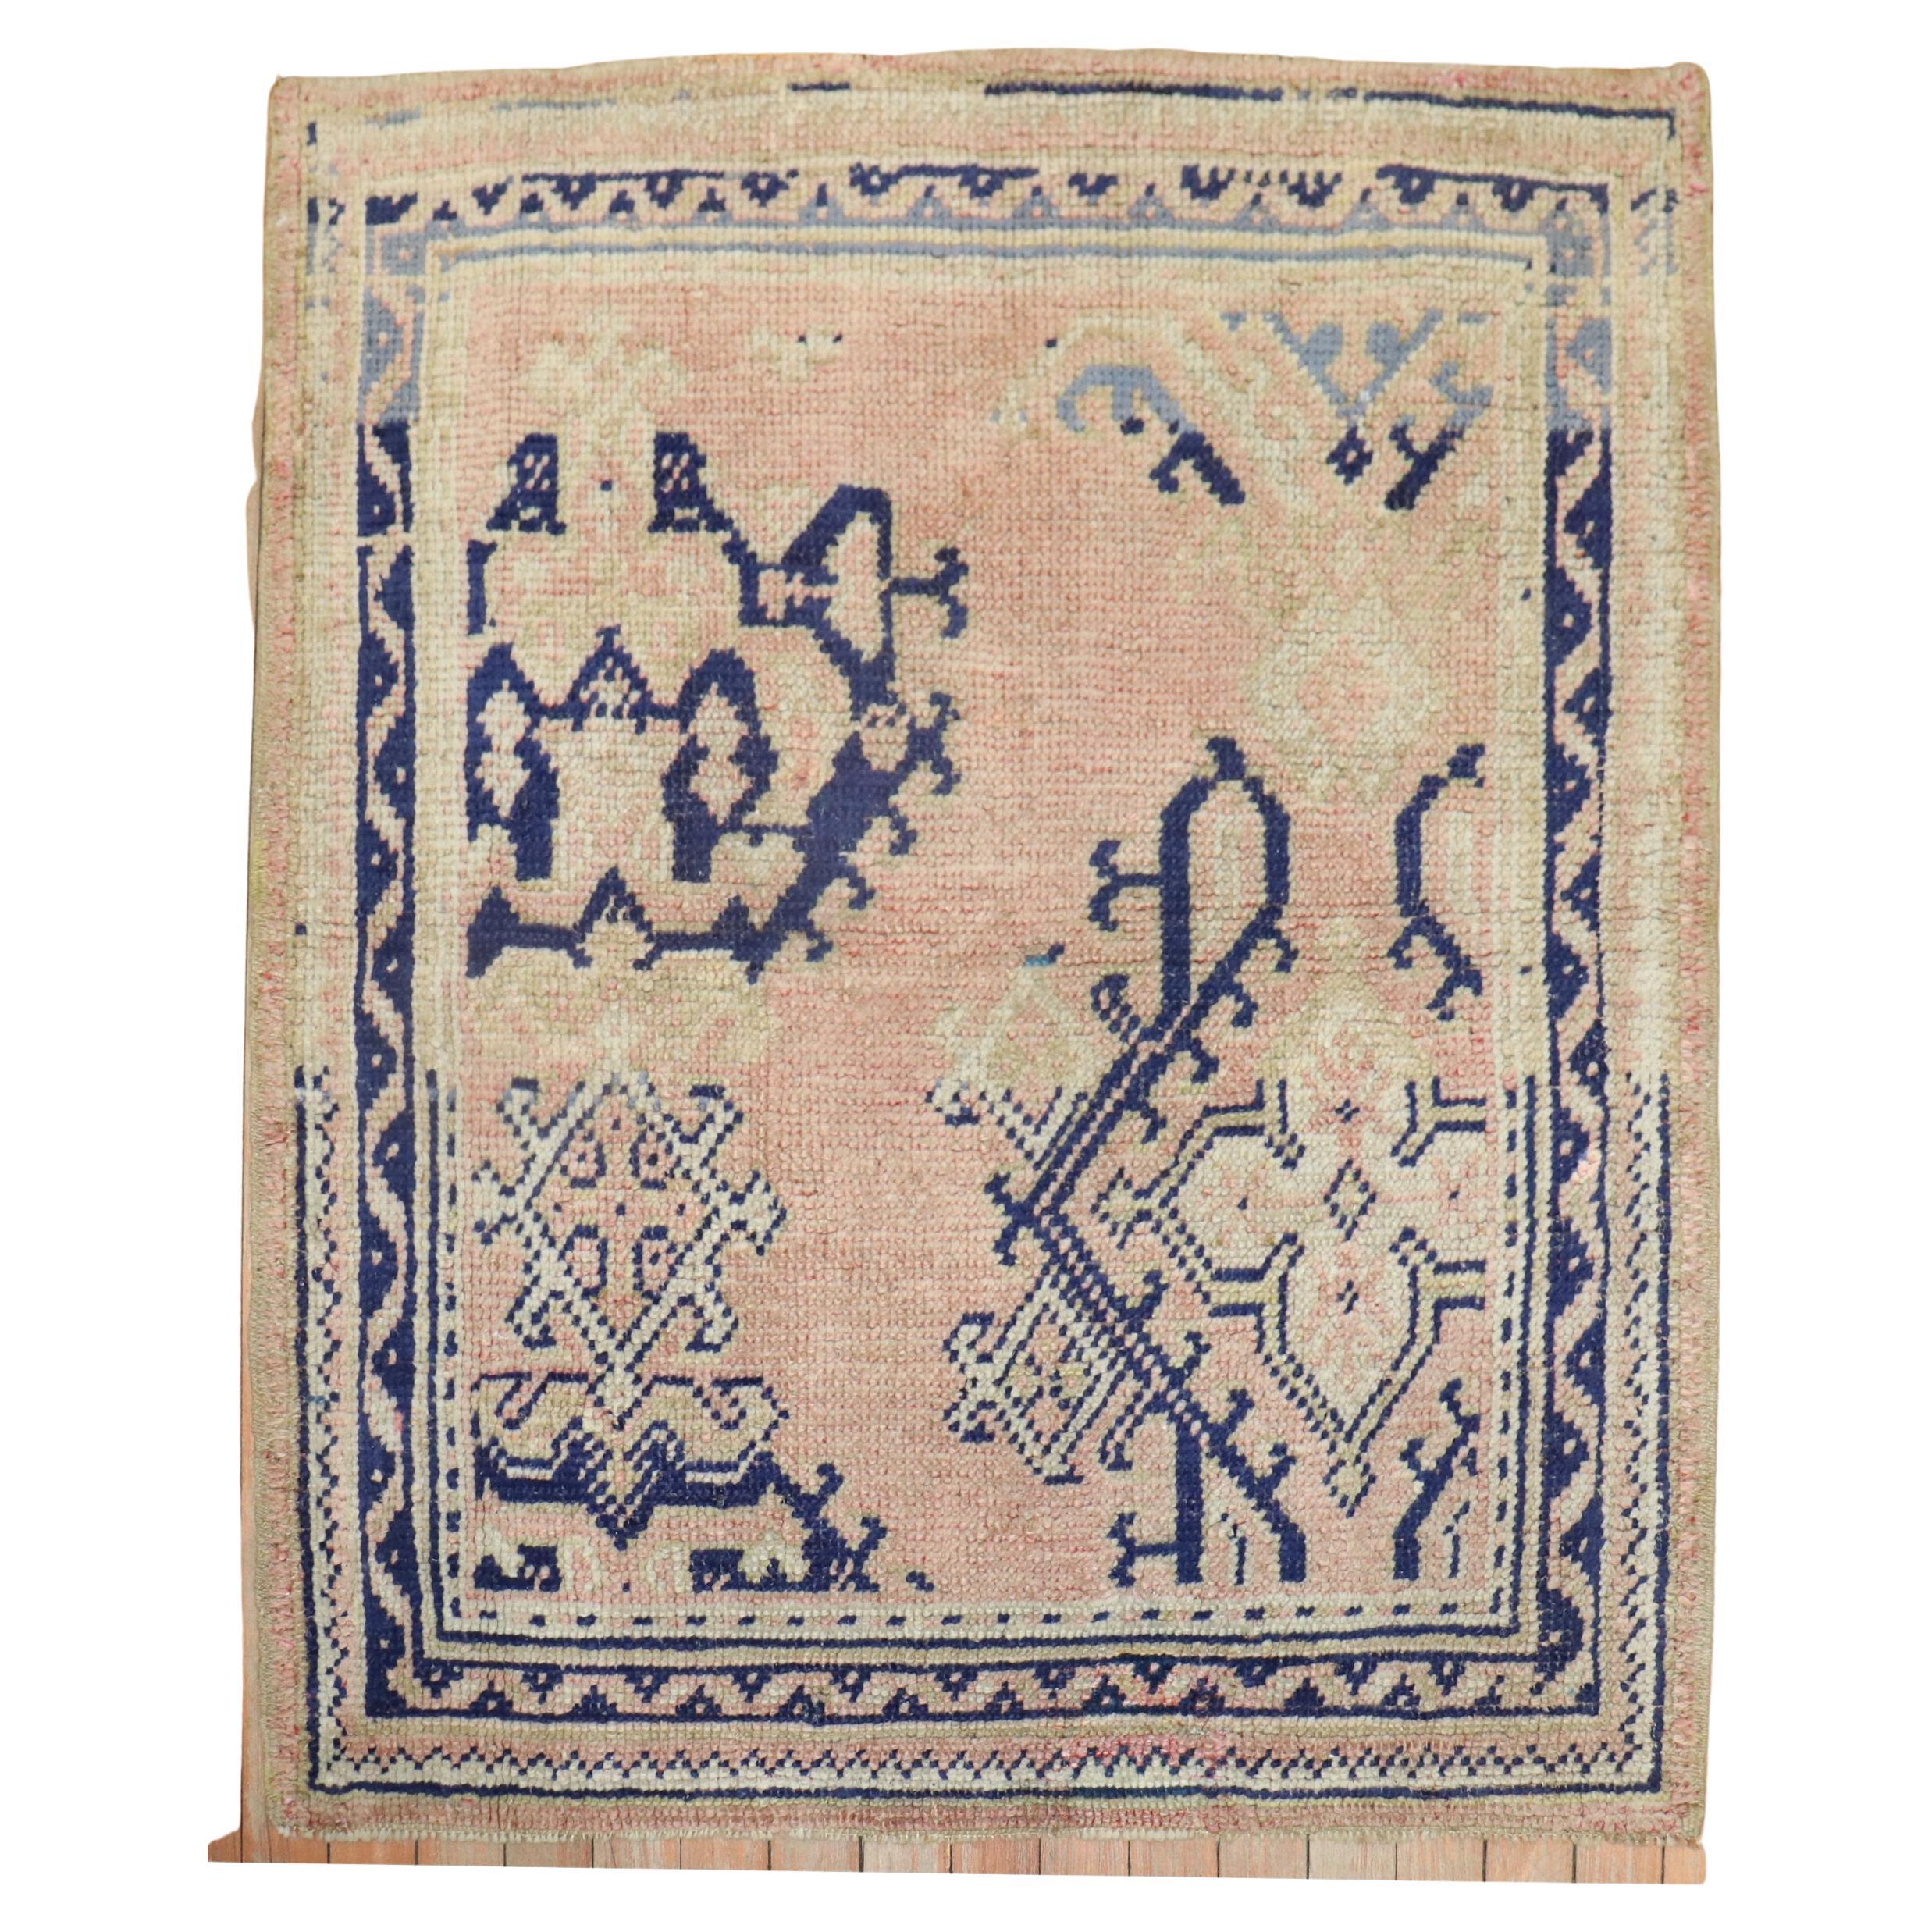 1920s Antique Oushak square Rug in soft pink and blue

rug no.	r5760
size	3' 1